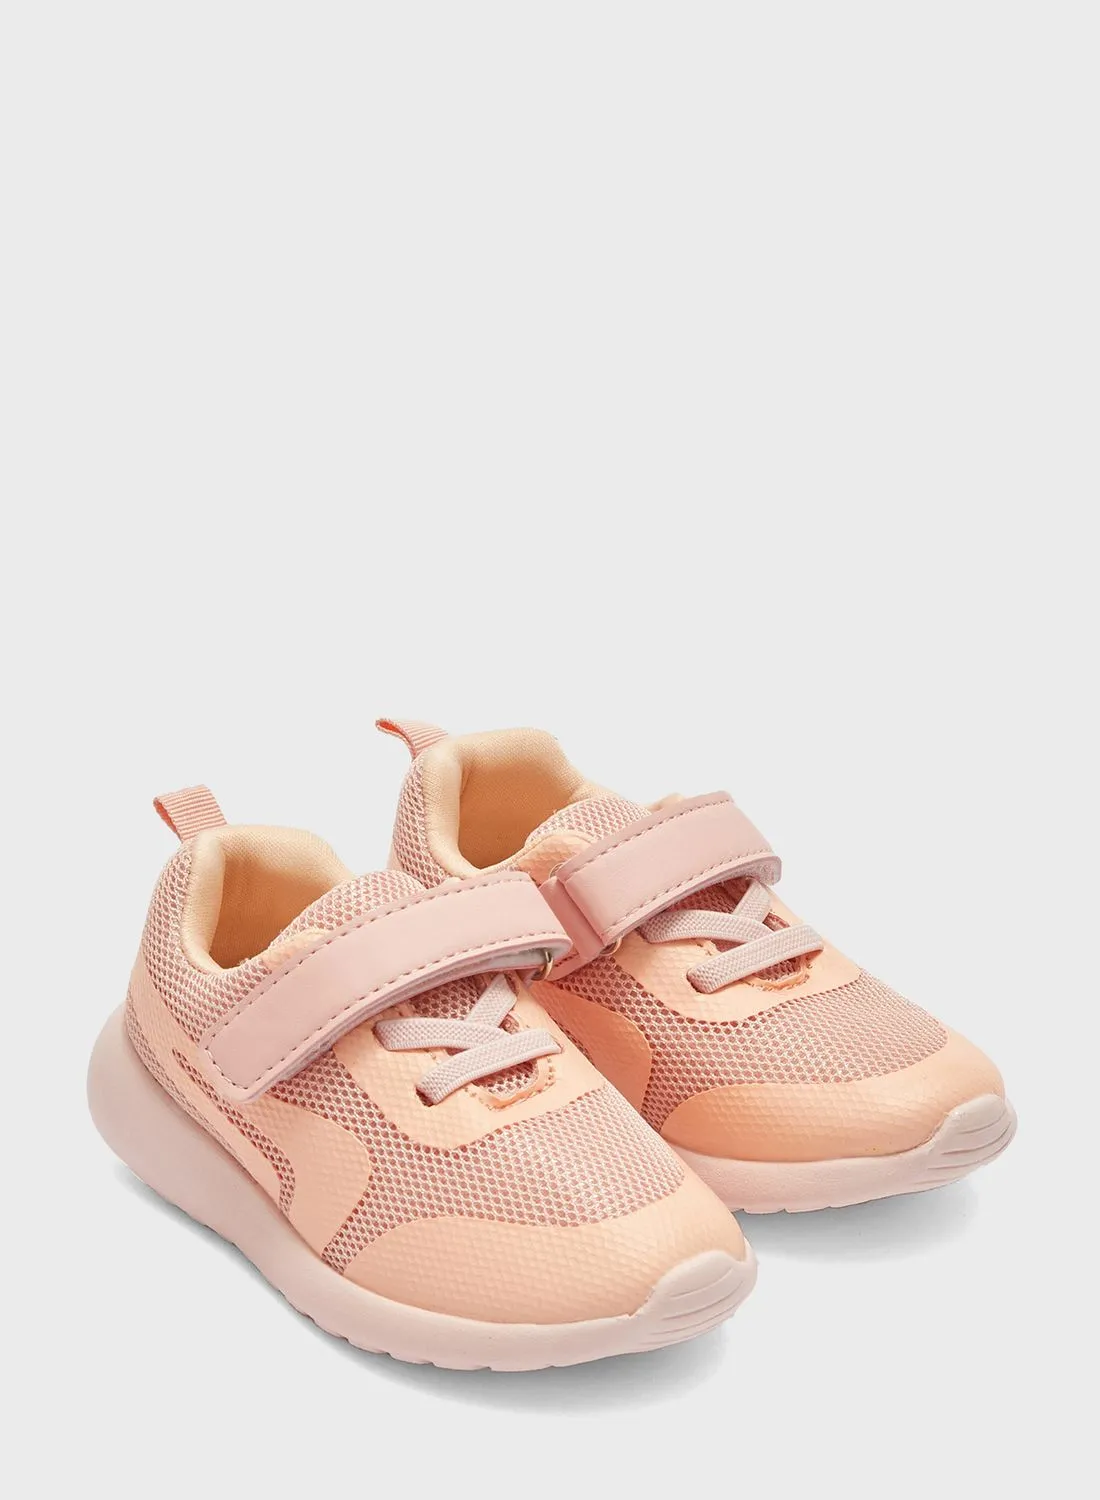 LC WAIKIKI Infant Low Top Velcro Sneakers